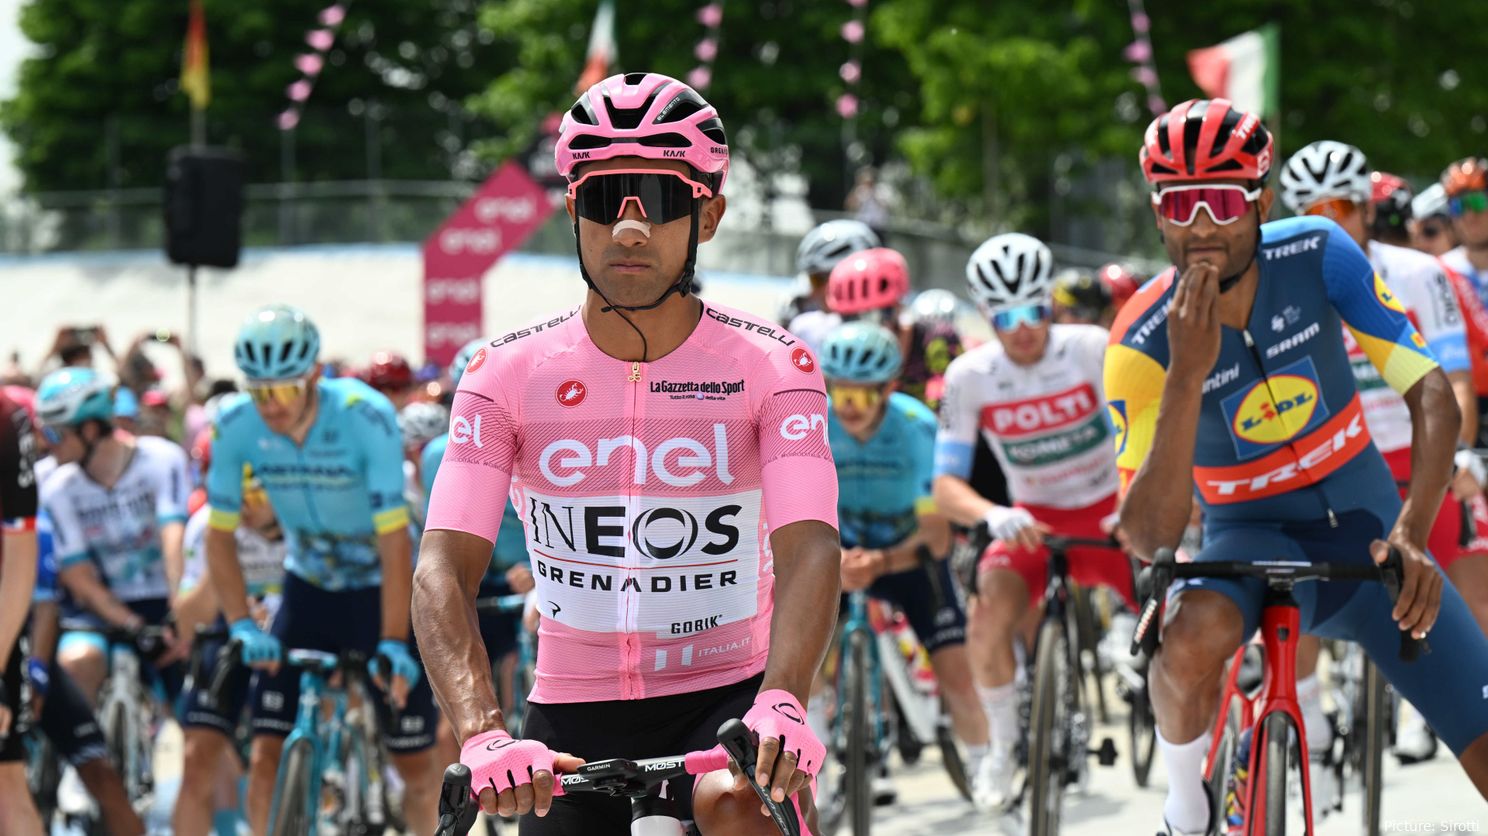 "My manager is going to have a lot of work" - Jhonatan Narvaez aware of transfer interest after positive Giro d'Italia